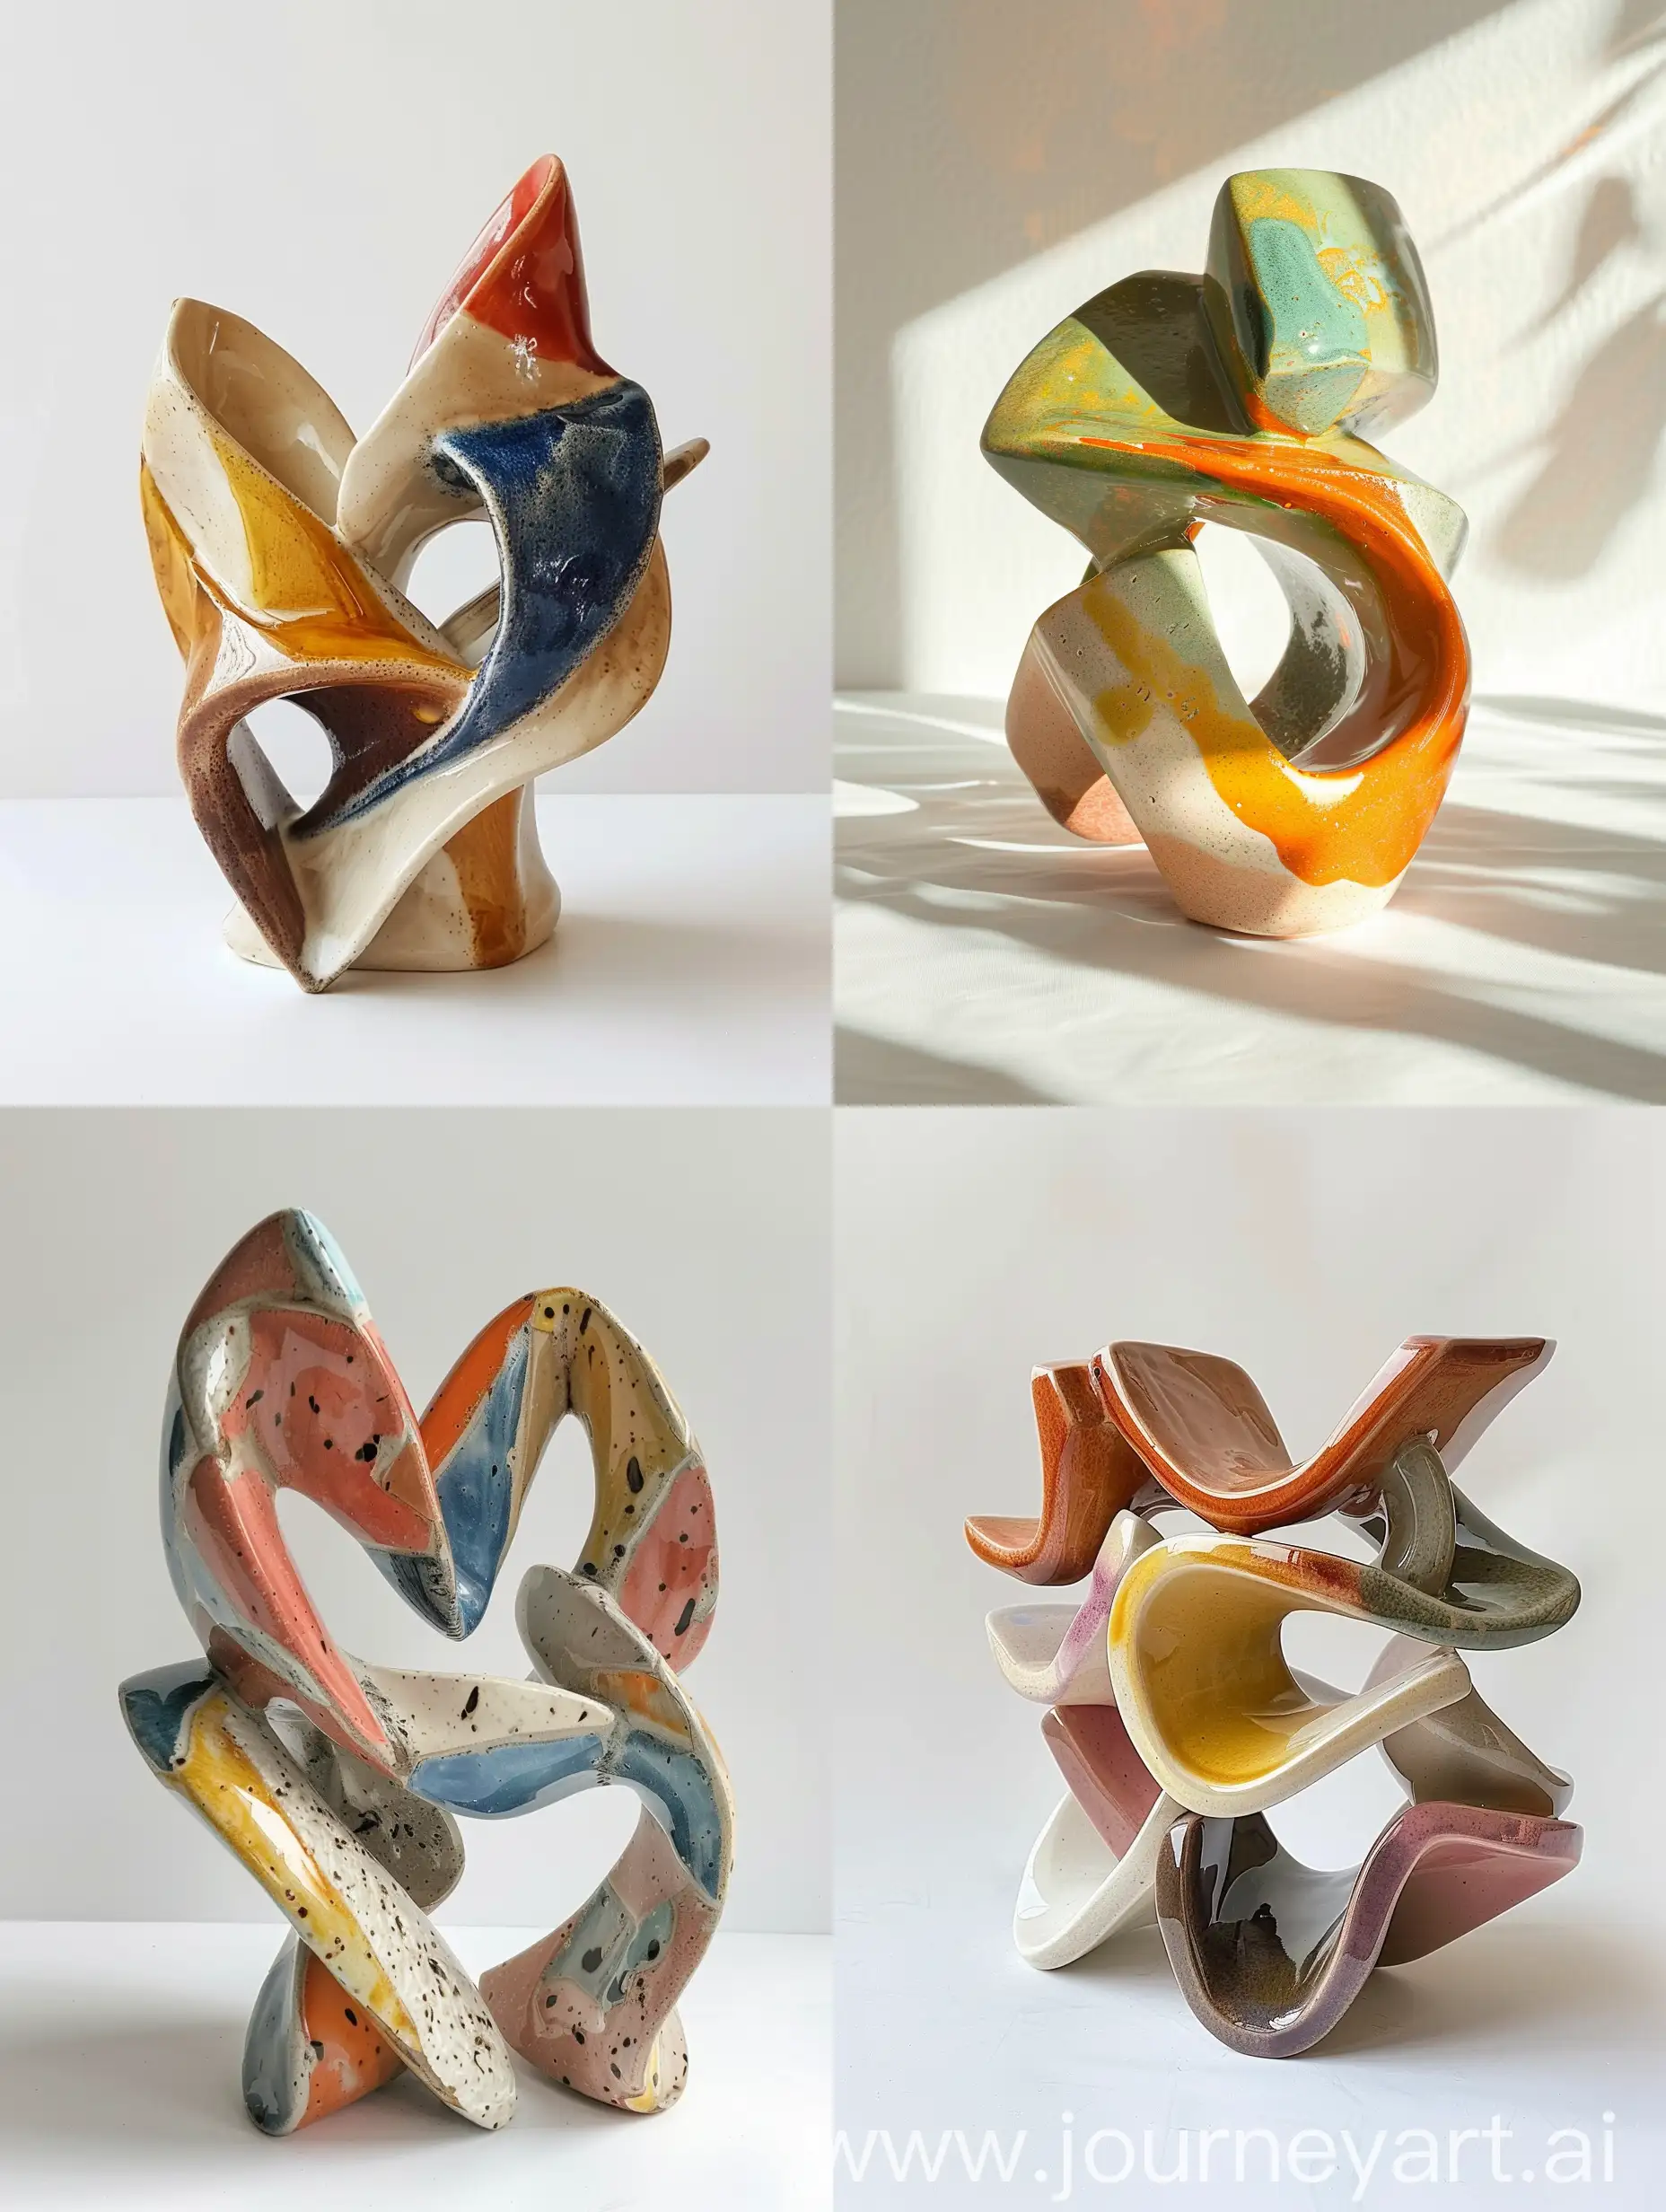 Expressive-Ceramic-Abstract-Sculpture-in-Scandinavian-Style-with-Retro-Colors-of-the-60s